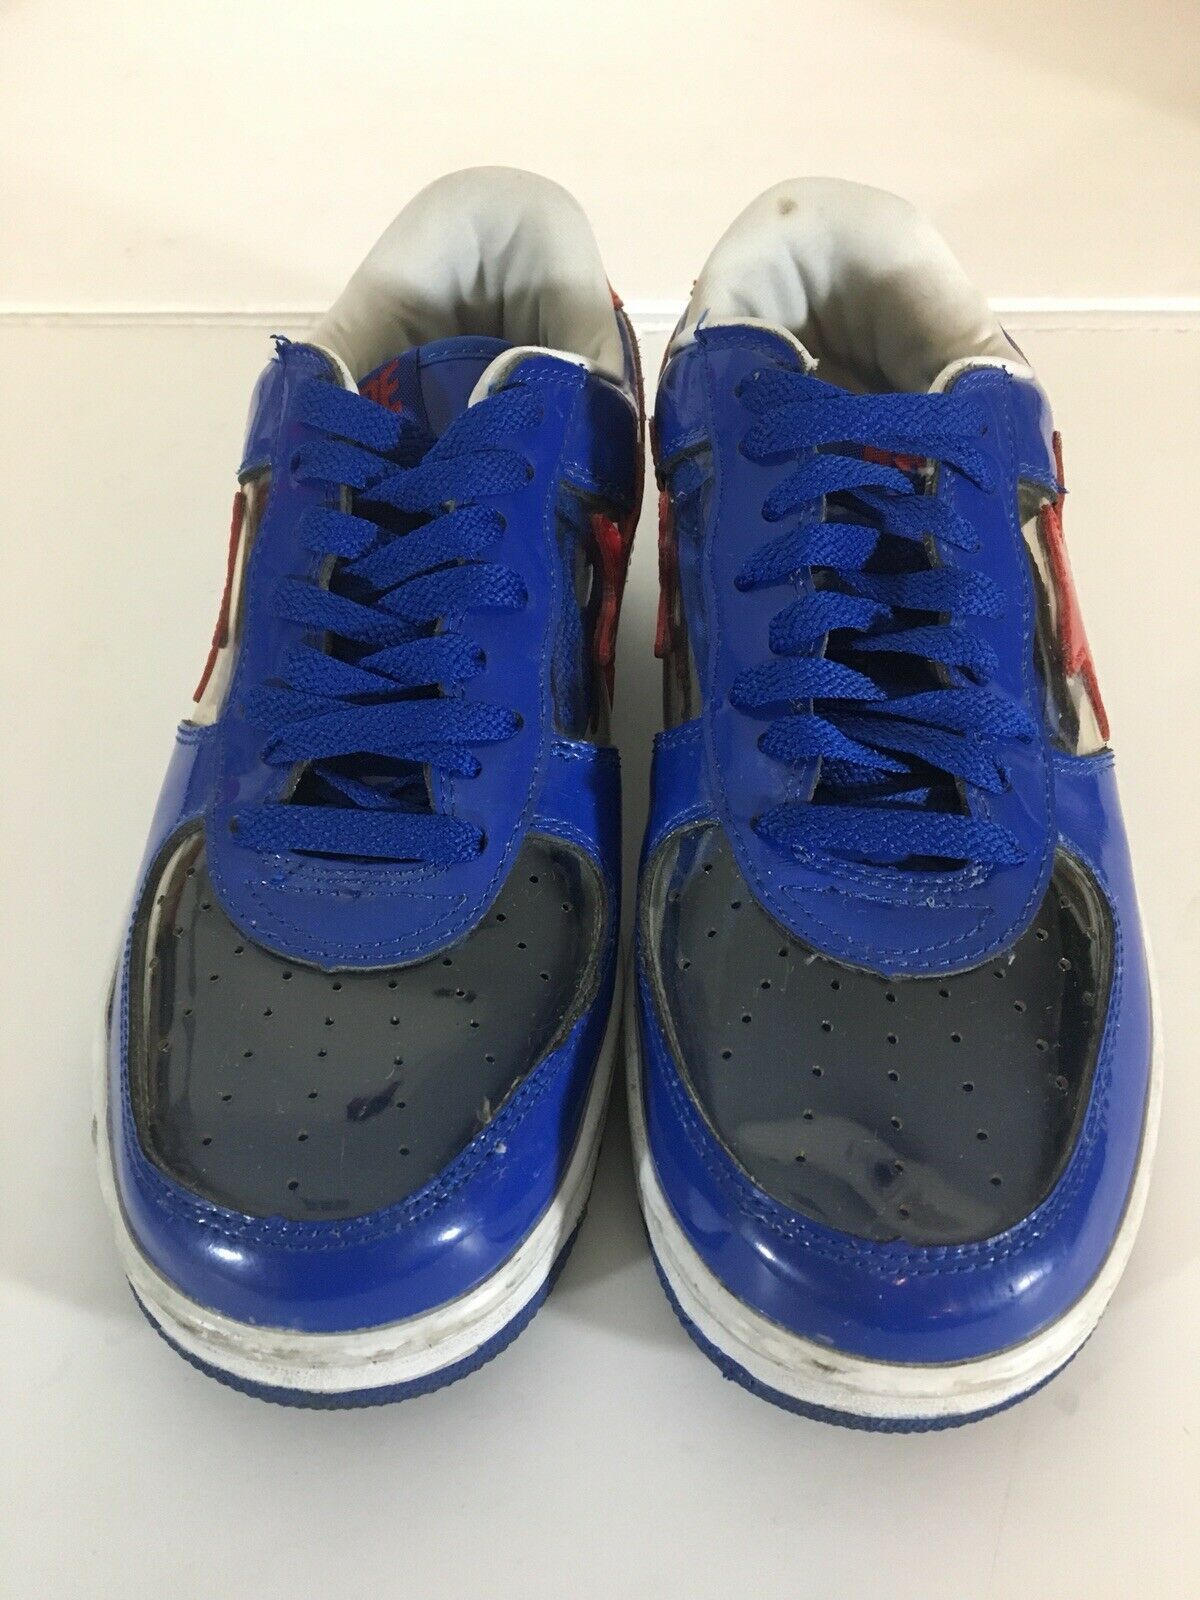 A BATHING APE BAPE STA FOOT SOLDIER FS-001 SNEAKERS BLUE RED CLEAR ...